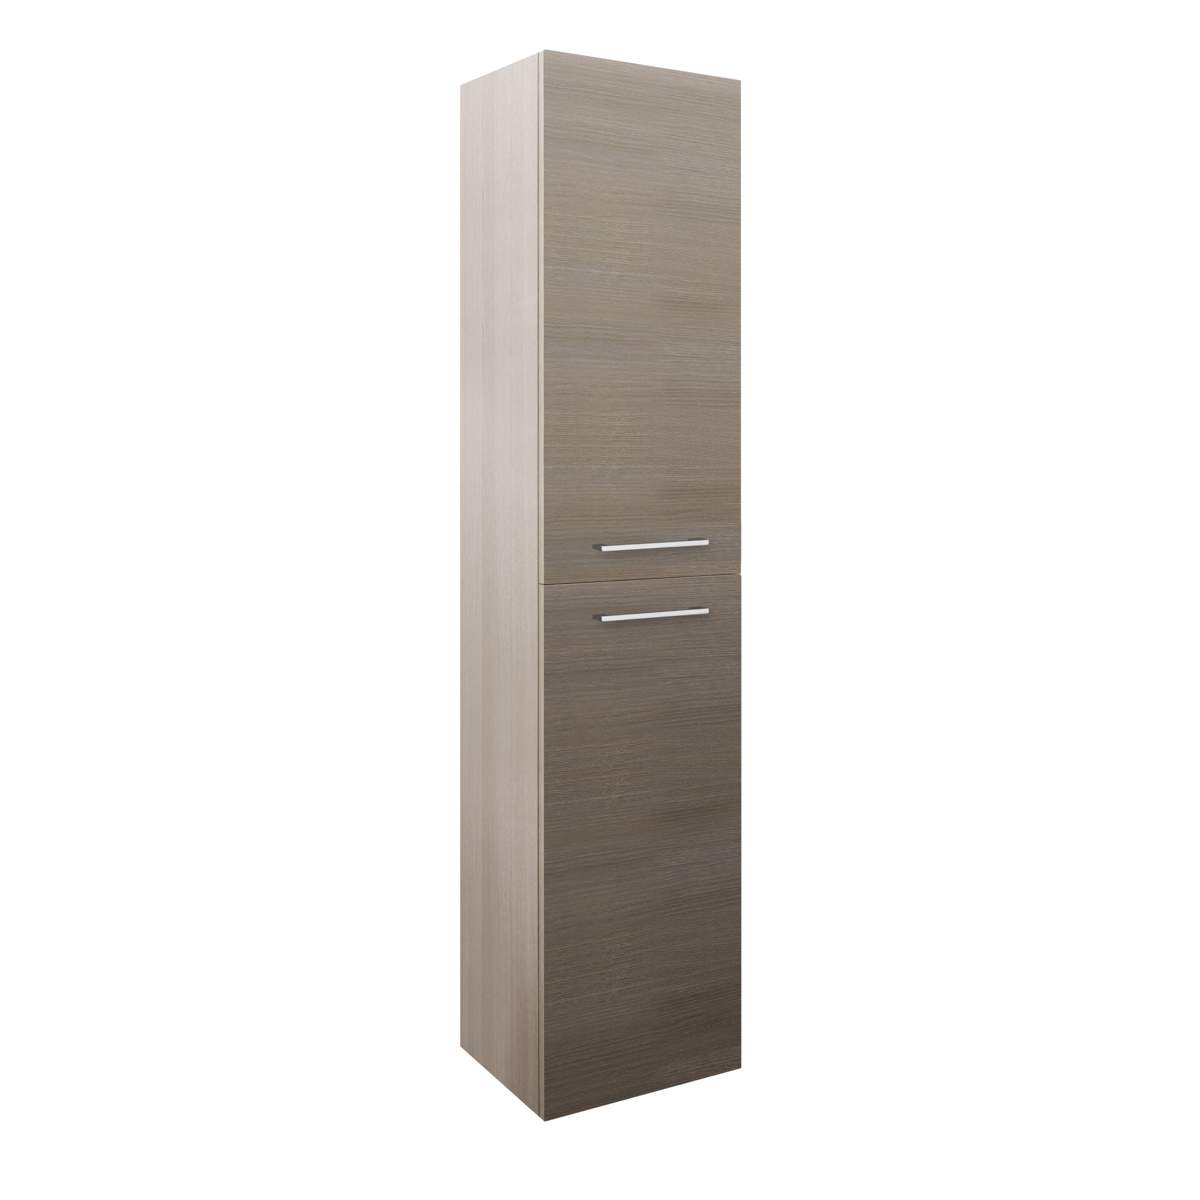 JTP Pace Units Double Door Side Cabinet in Grey (WAL160GR)